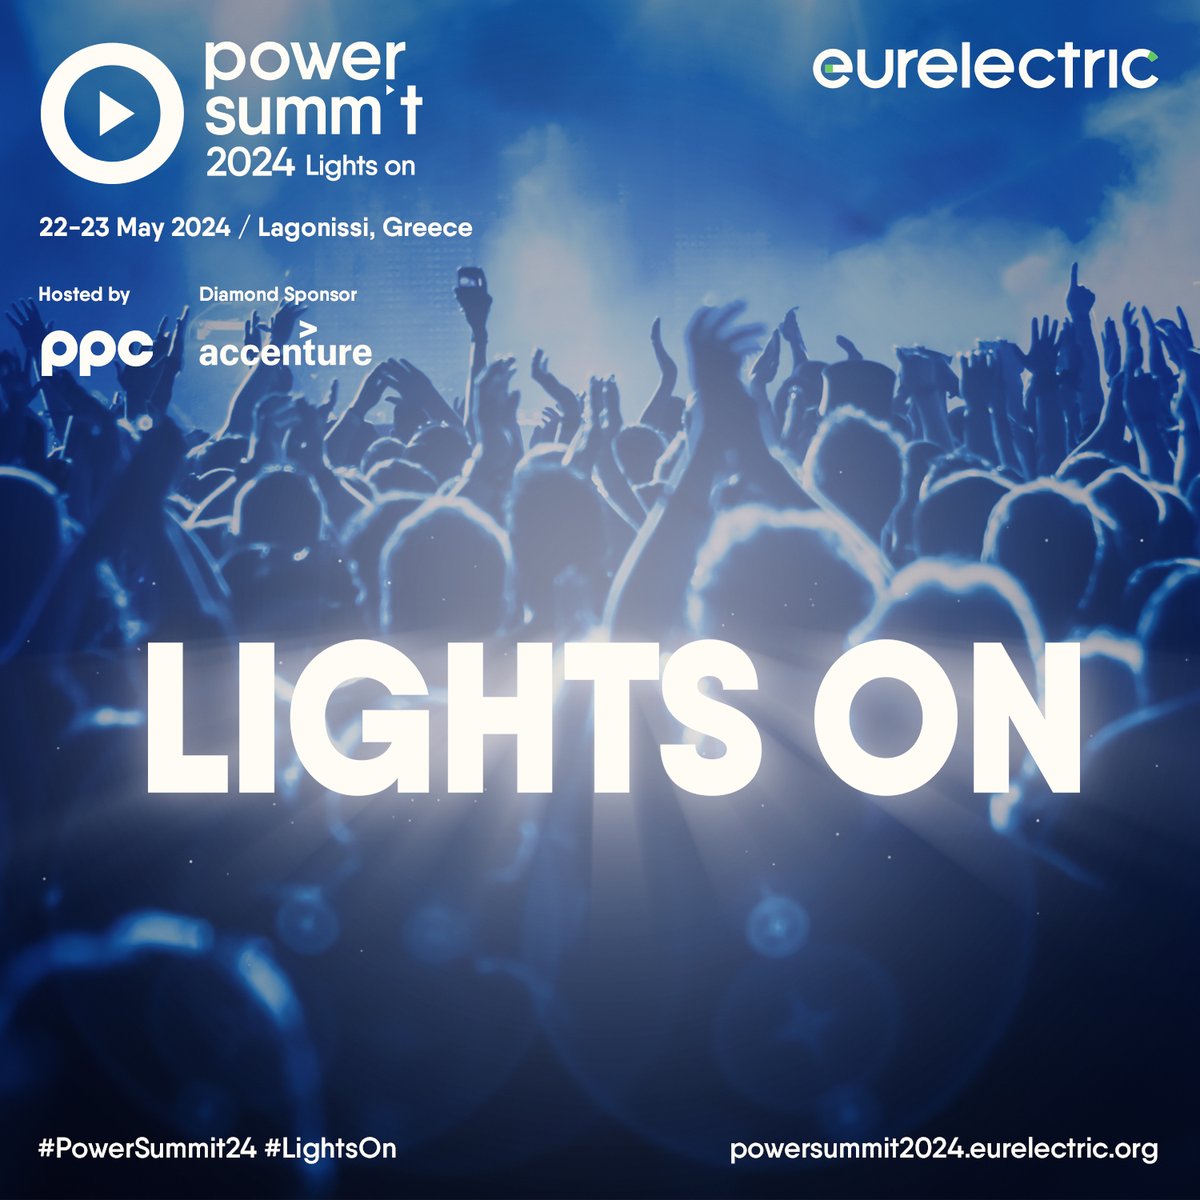 We're partnering with @Eurelectric for #PowerSummit24, the annual event bringing together power sector leaders, top voices, and policymakers. Secure your spot today! bit.ly/3TlMSqQ 📅 22-23 May, Lagonissi, Greece. #electrification #energysecurity #decarbonisation